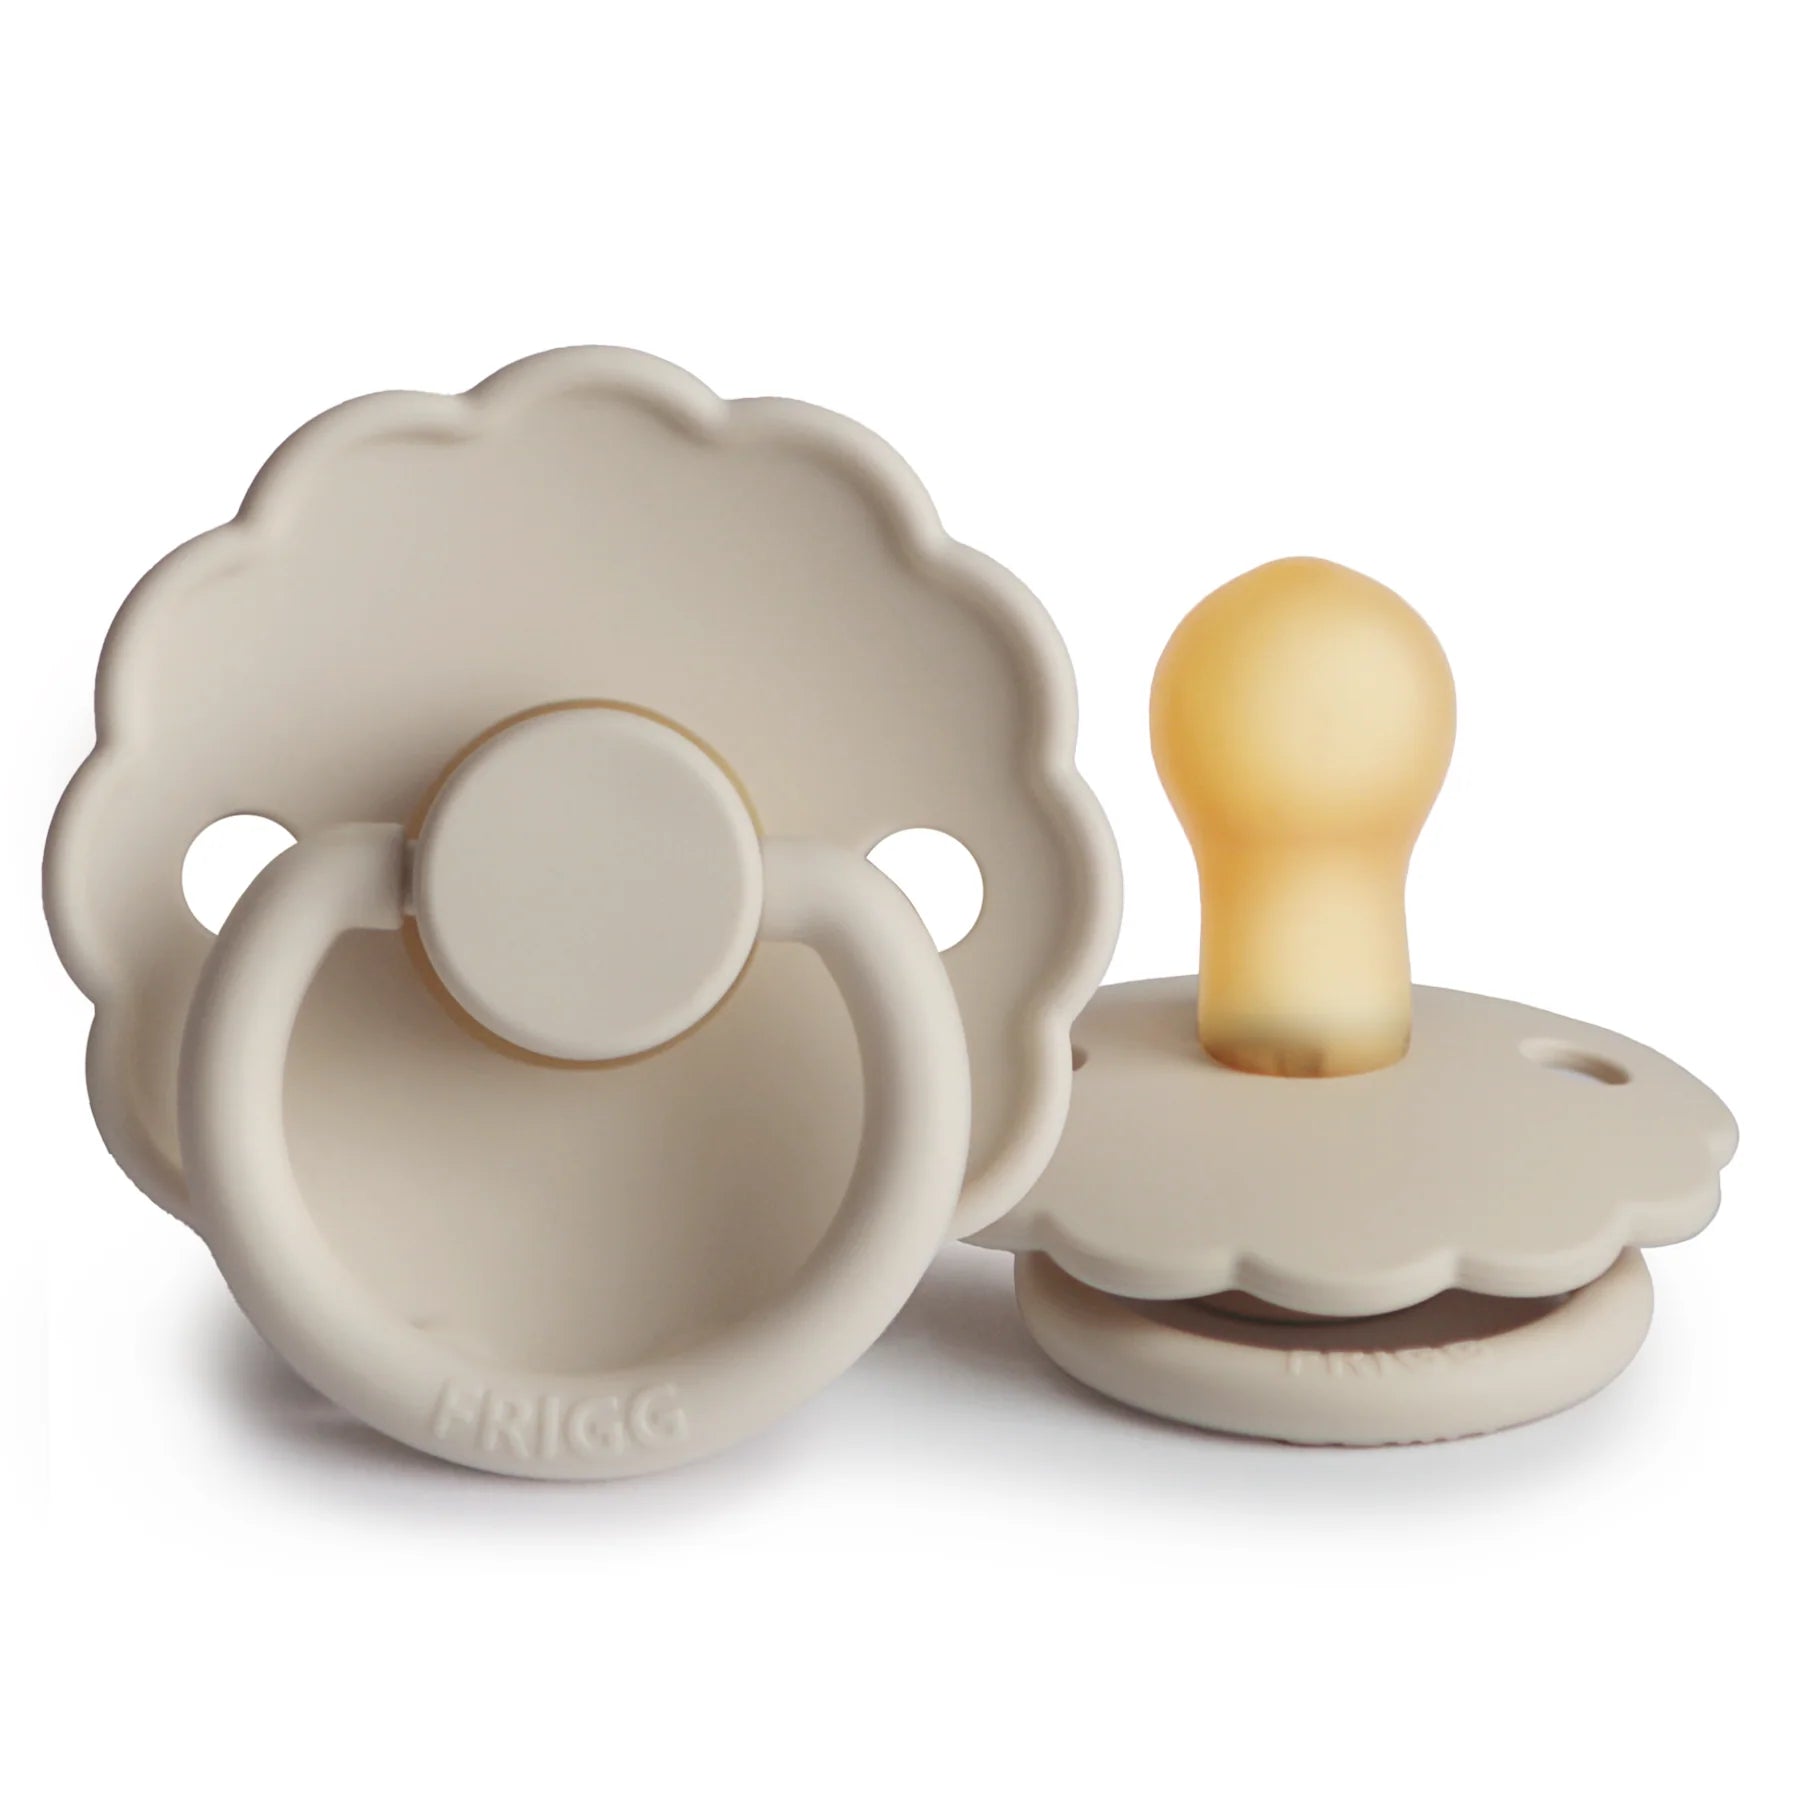 FRIGG Daisy Pacifier | Sandstone | 2 pack